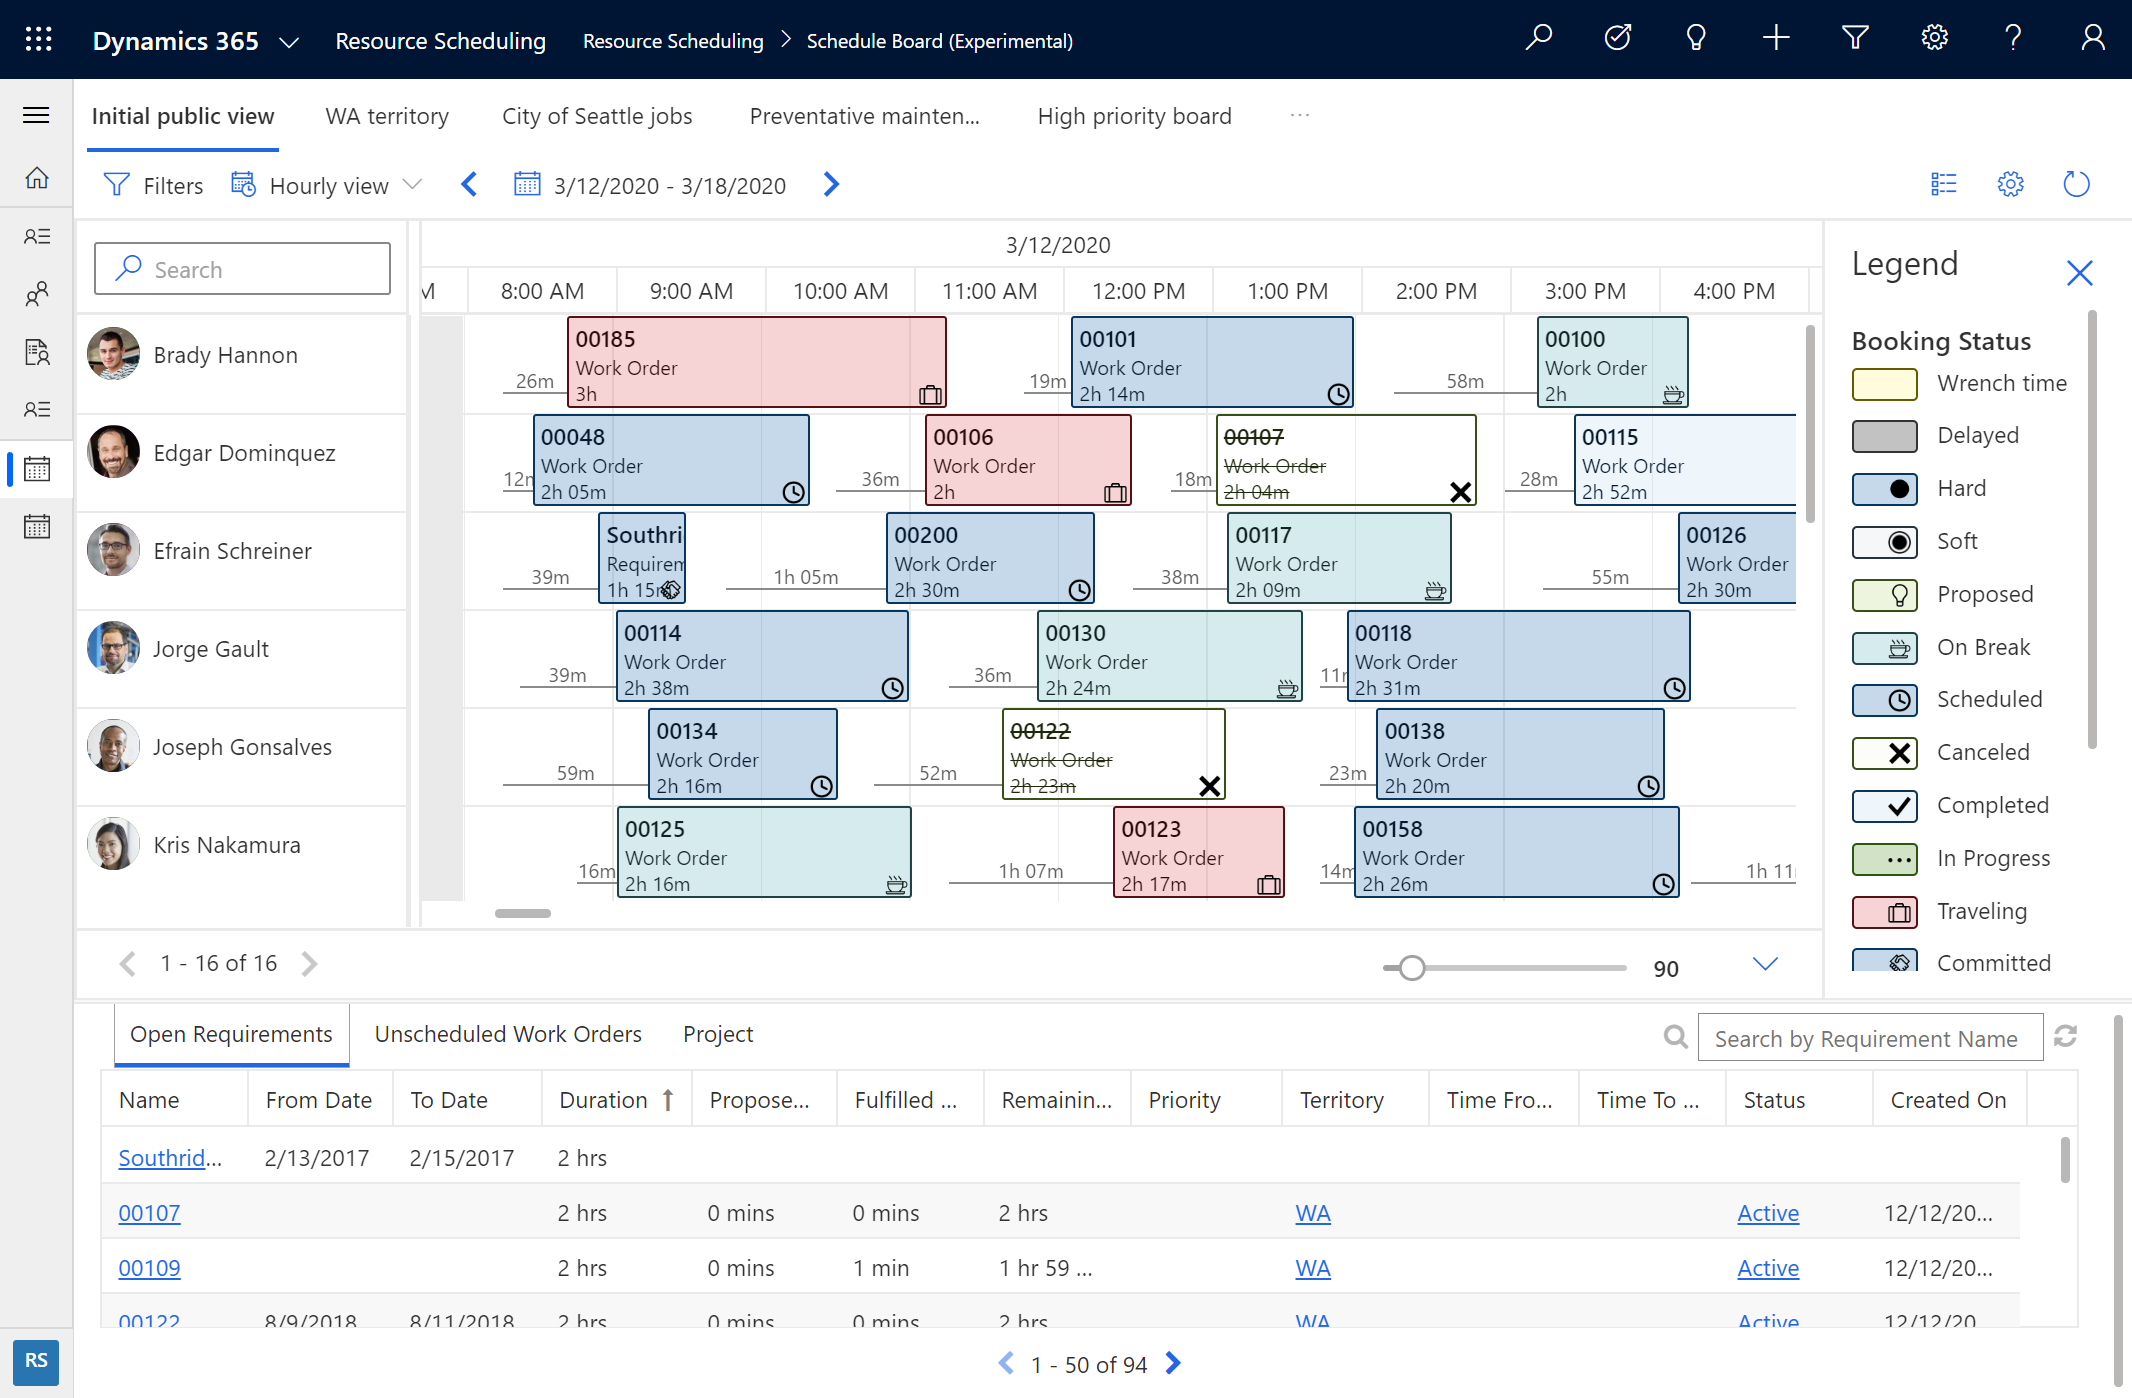 Screenshot of the new schedule board in Dynamics 365, showing the resources.